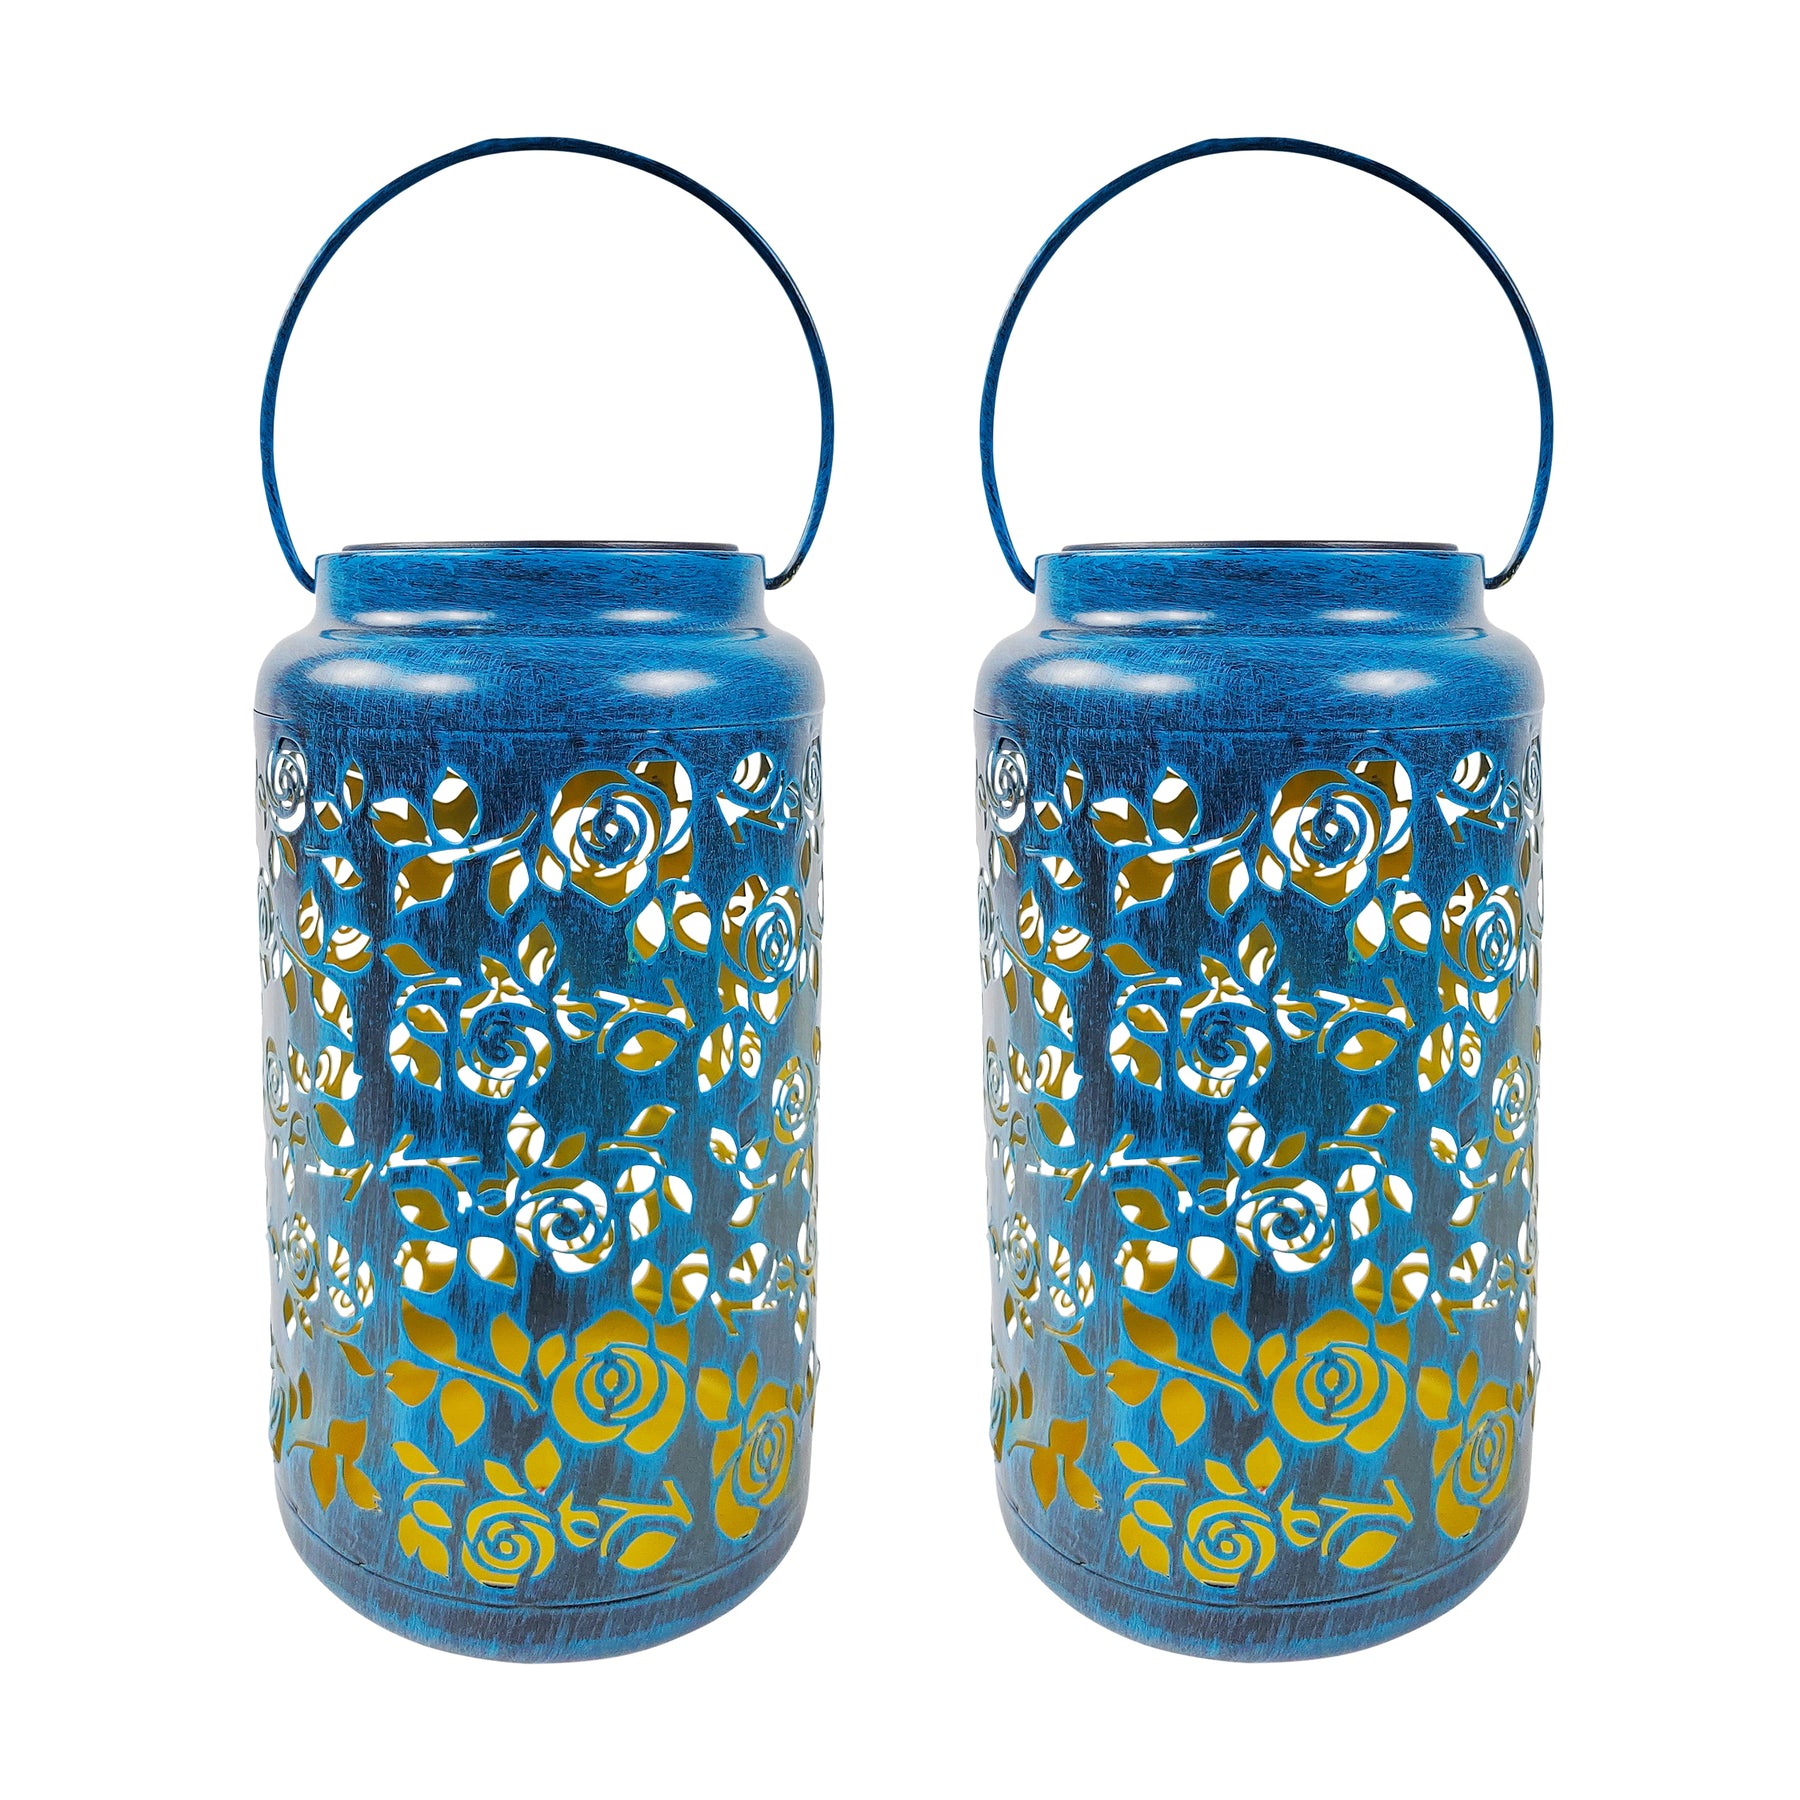 Bliss Outdoors 9-inch Tall 2-Pack Hanging and Tabletop Decorative Solar LED Lantern w/ Unique Rose Design and Antique Hand Painted Finish in the brushed blue variation.